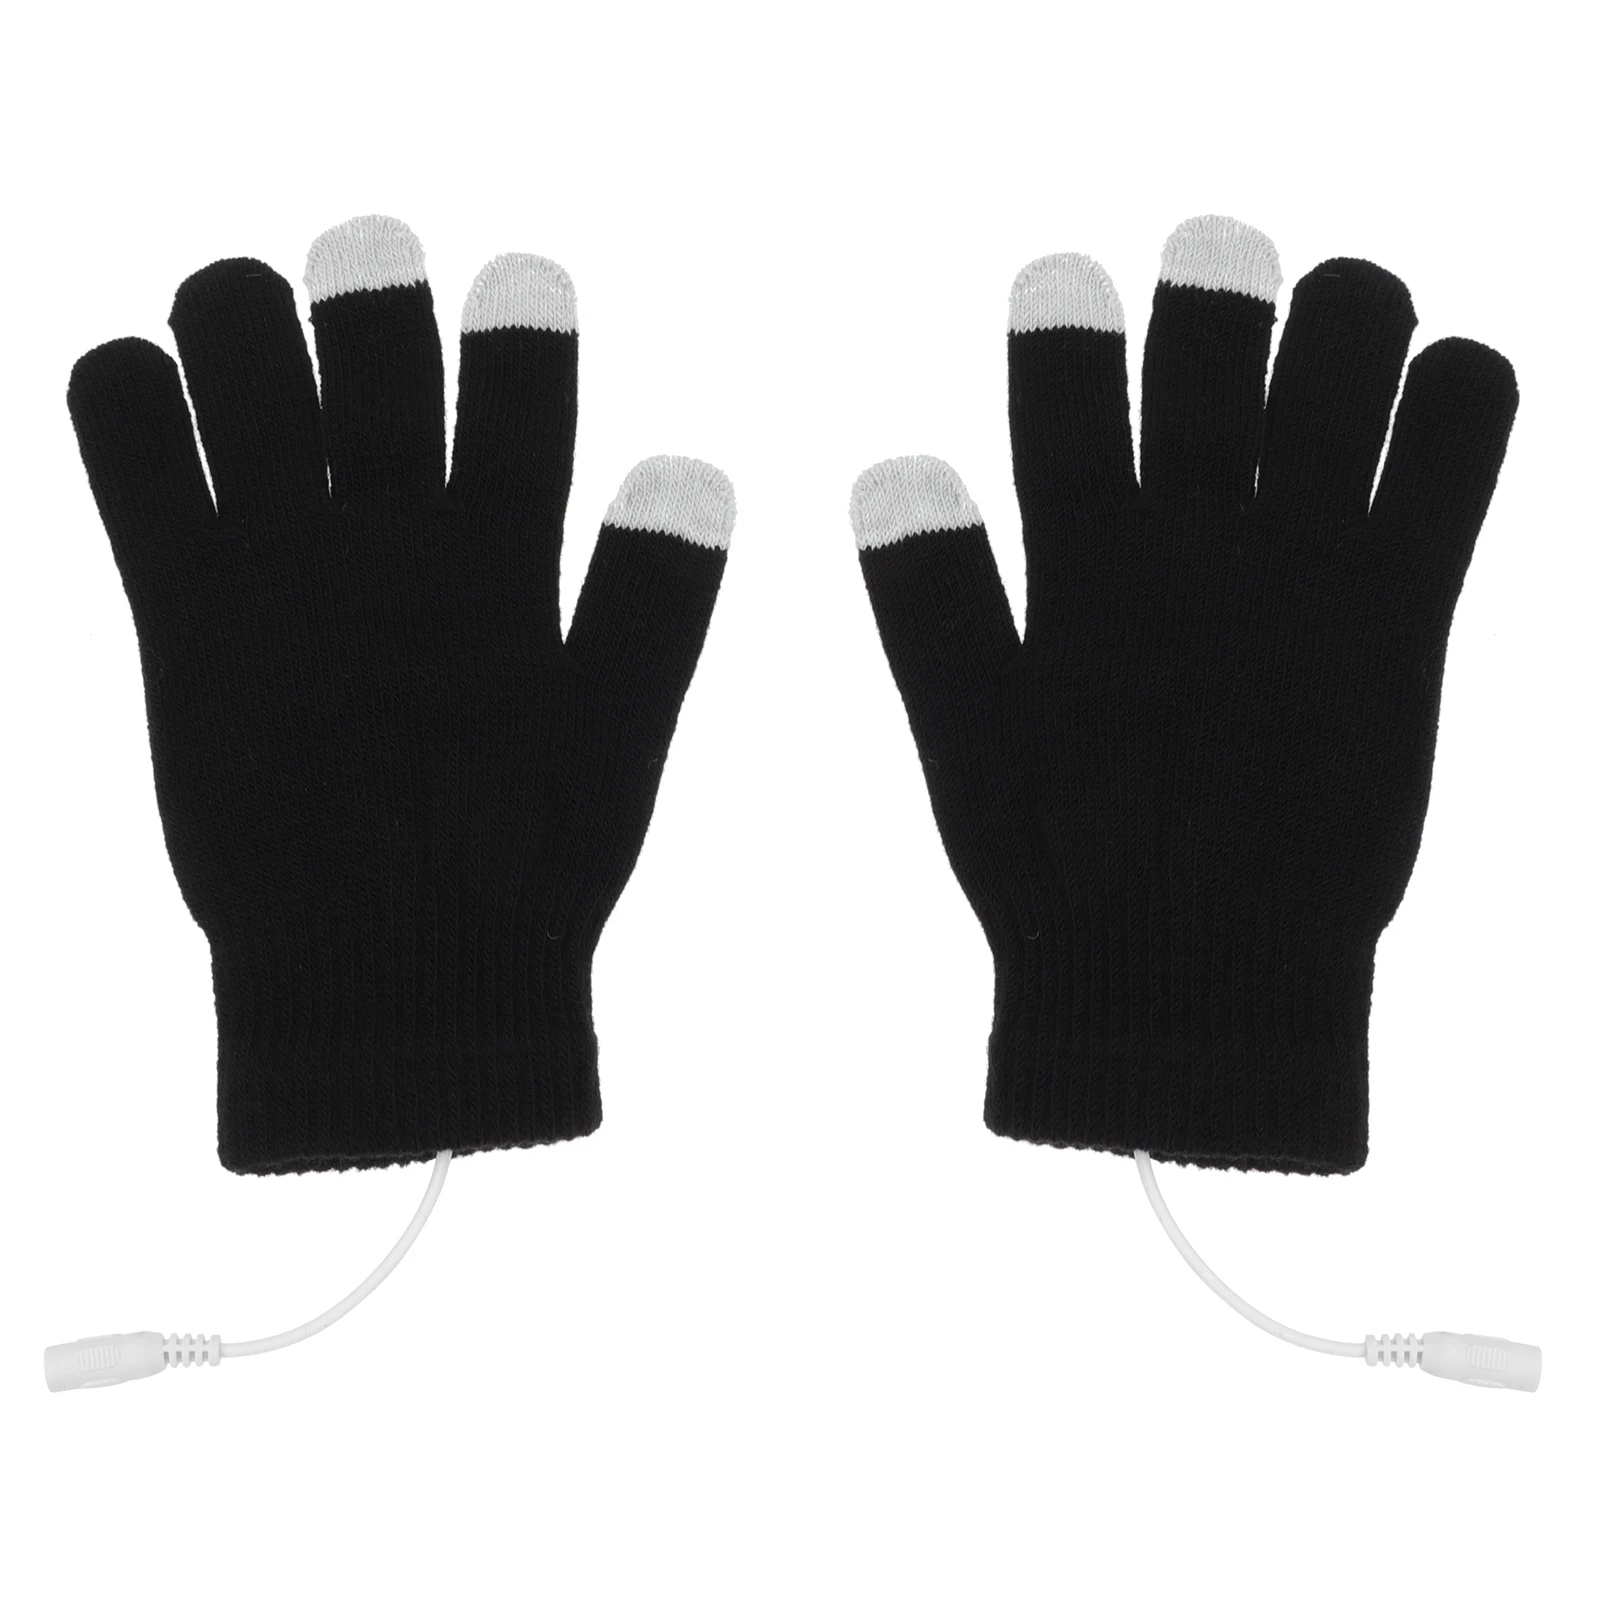 Heating Gloves USB Heated Touch Screen Mittens Cotton Gloves Unisex Winter Typing Touch Screen Cold Protective Hand Gloves new moto cycling electric heating gloves rechargeable heated gloves touch screen thermal gloves mountain winter summer gloves